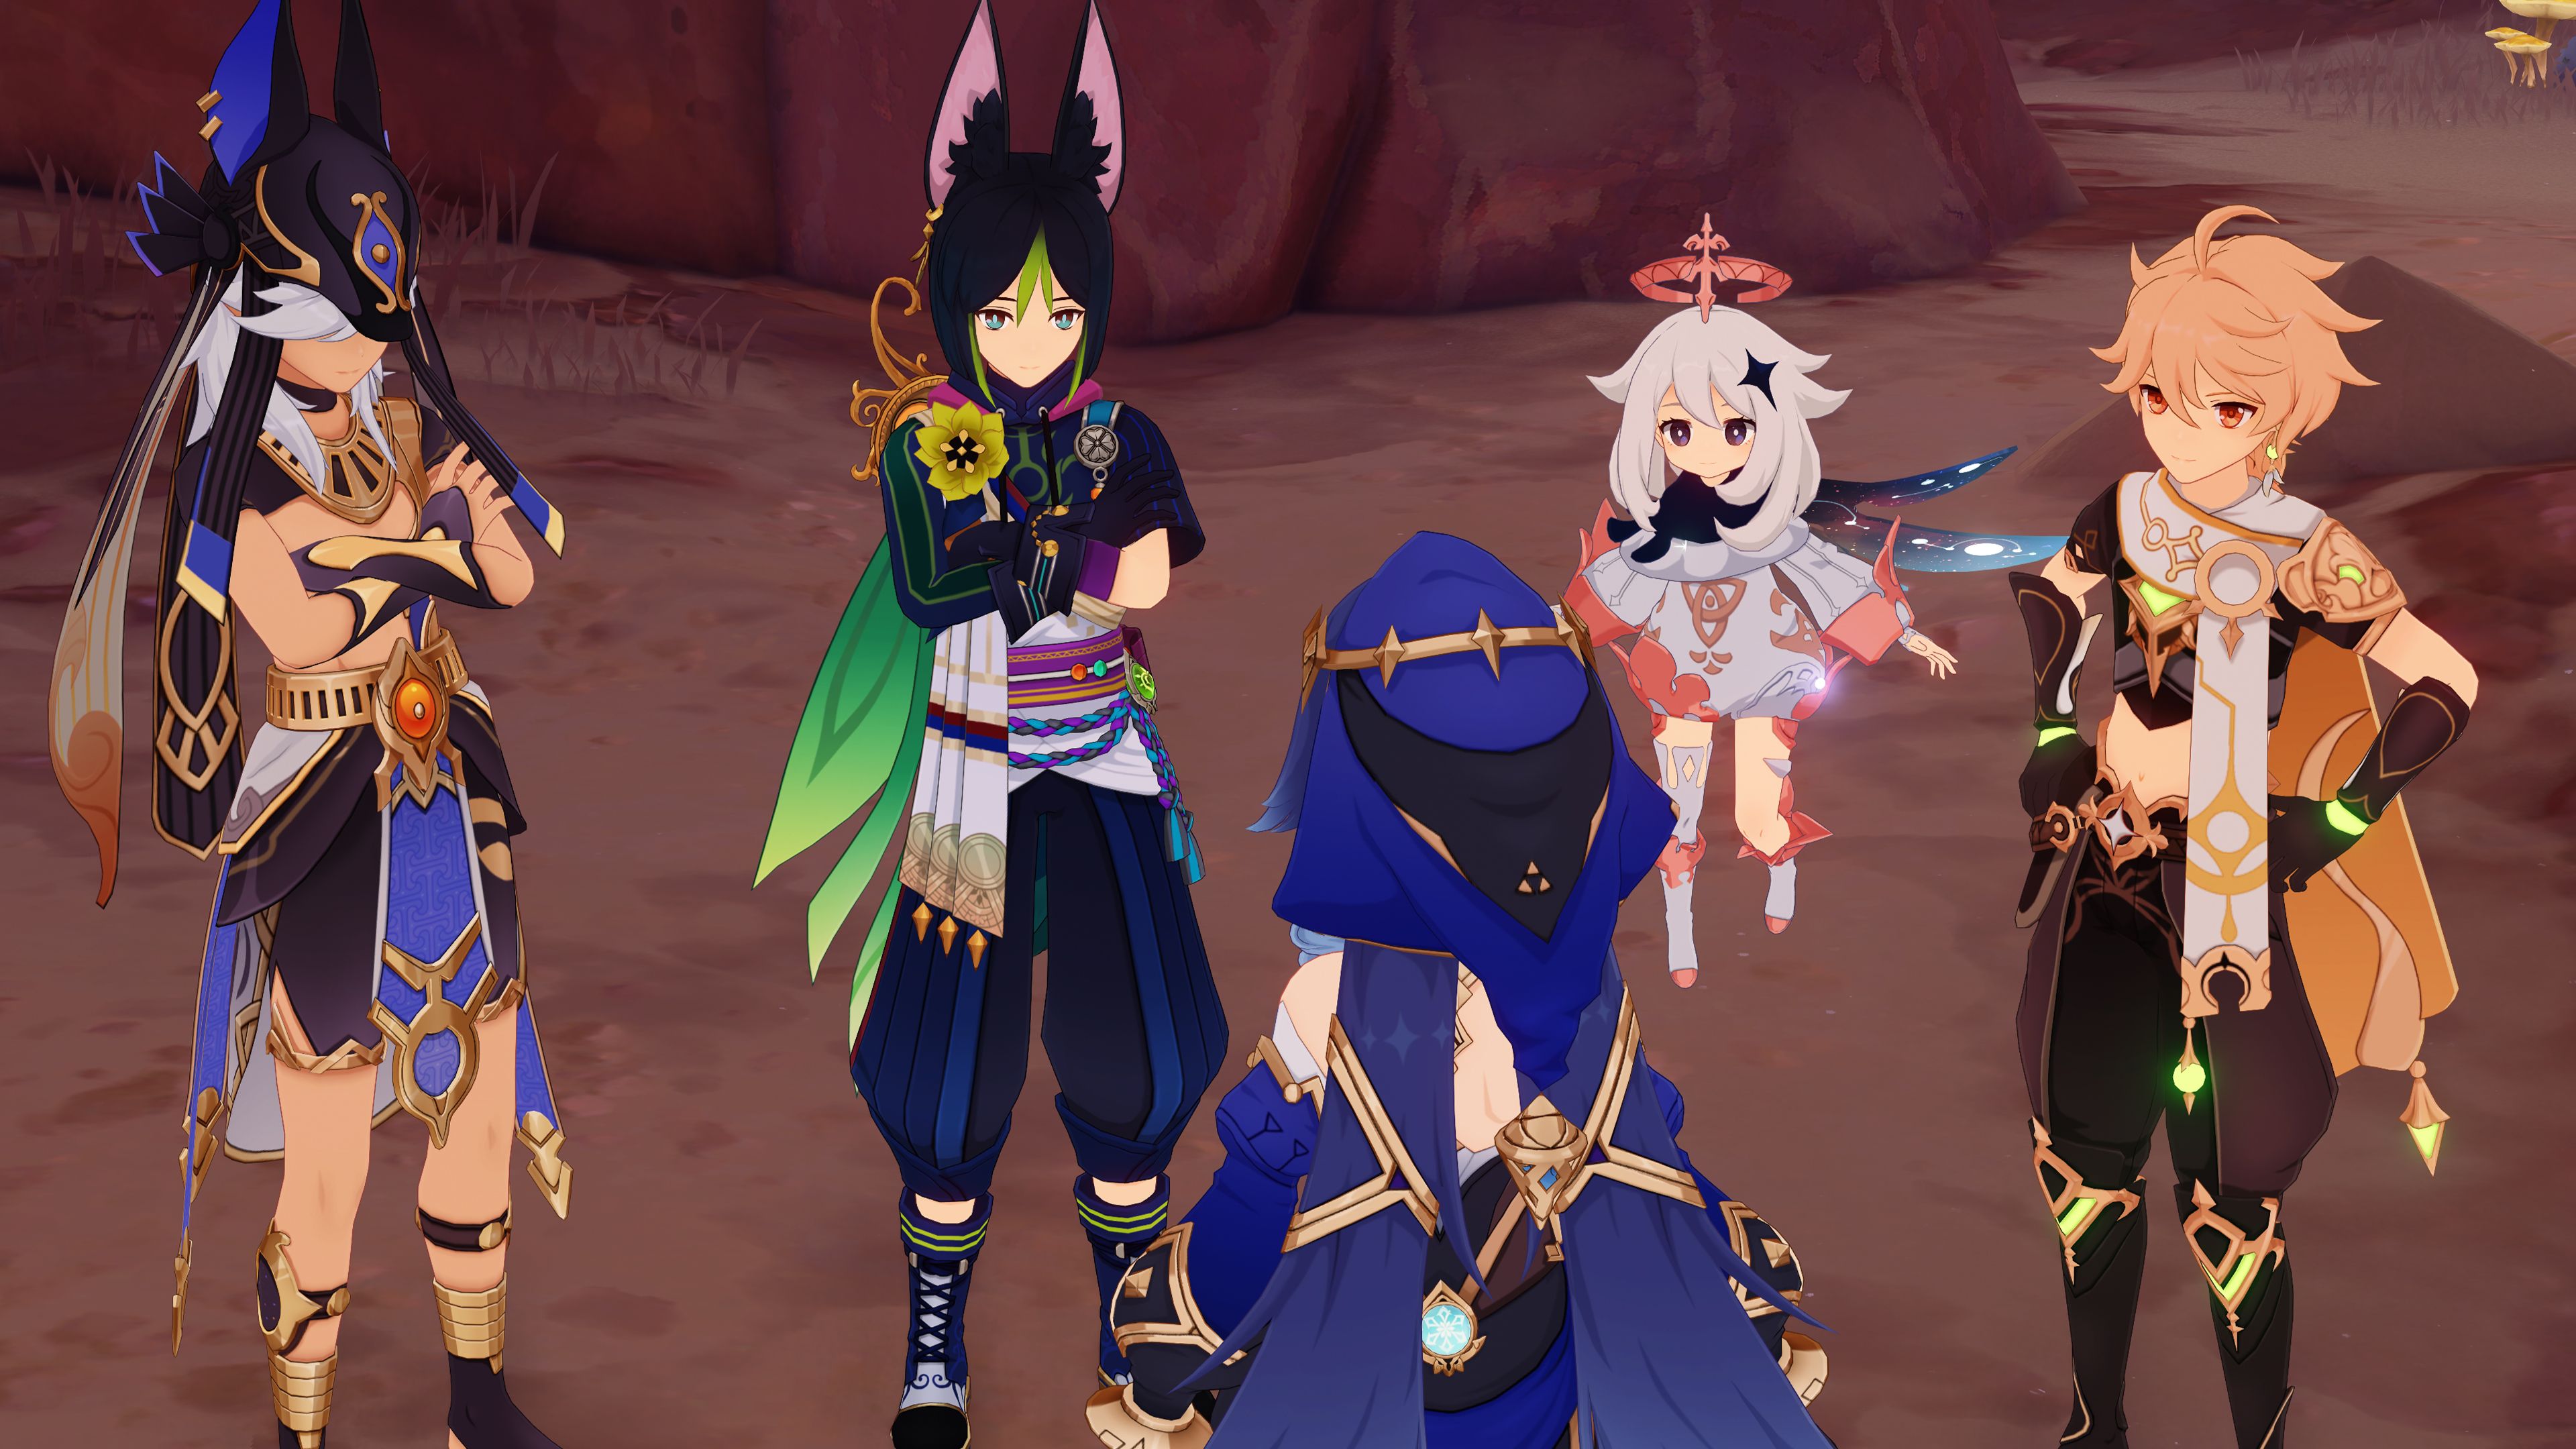 Cyno stands to the left, Tighnari in the middle, and Paimon floats next to the Traveler, on the right. All of them are faced towards the camera, looking at Layla, whose back is featured in the image. They are gathered in a desert area of Sumeru.